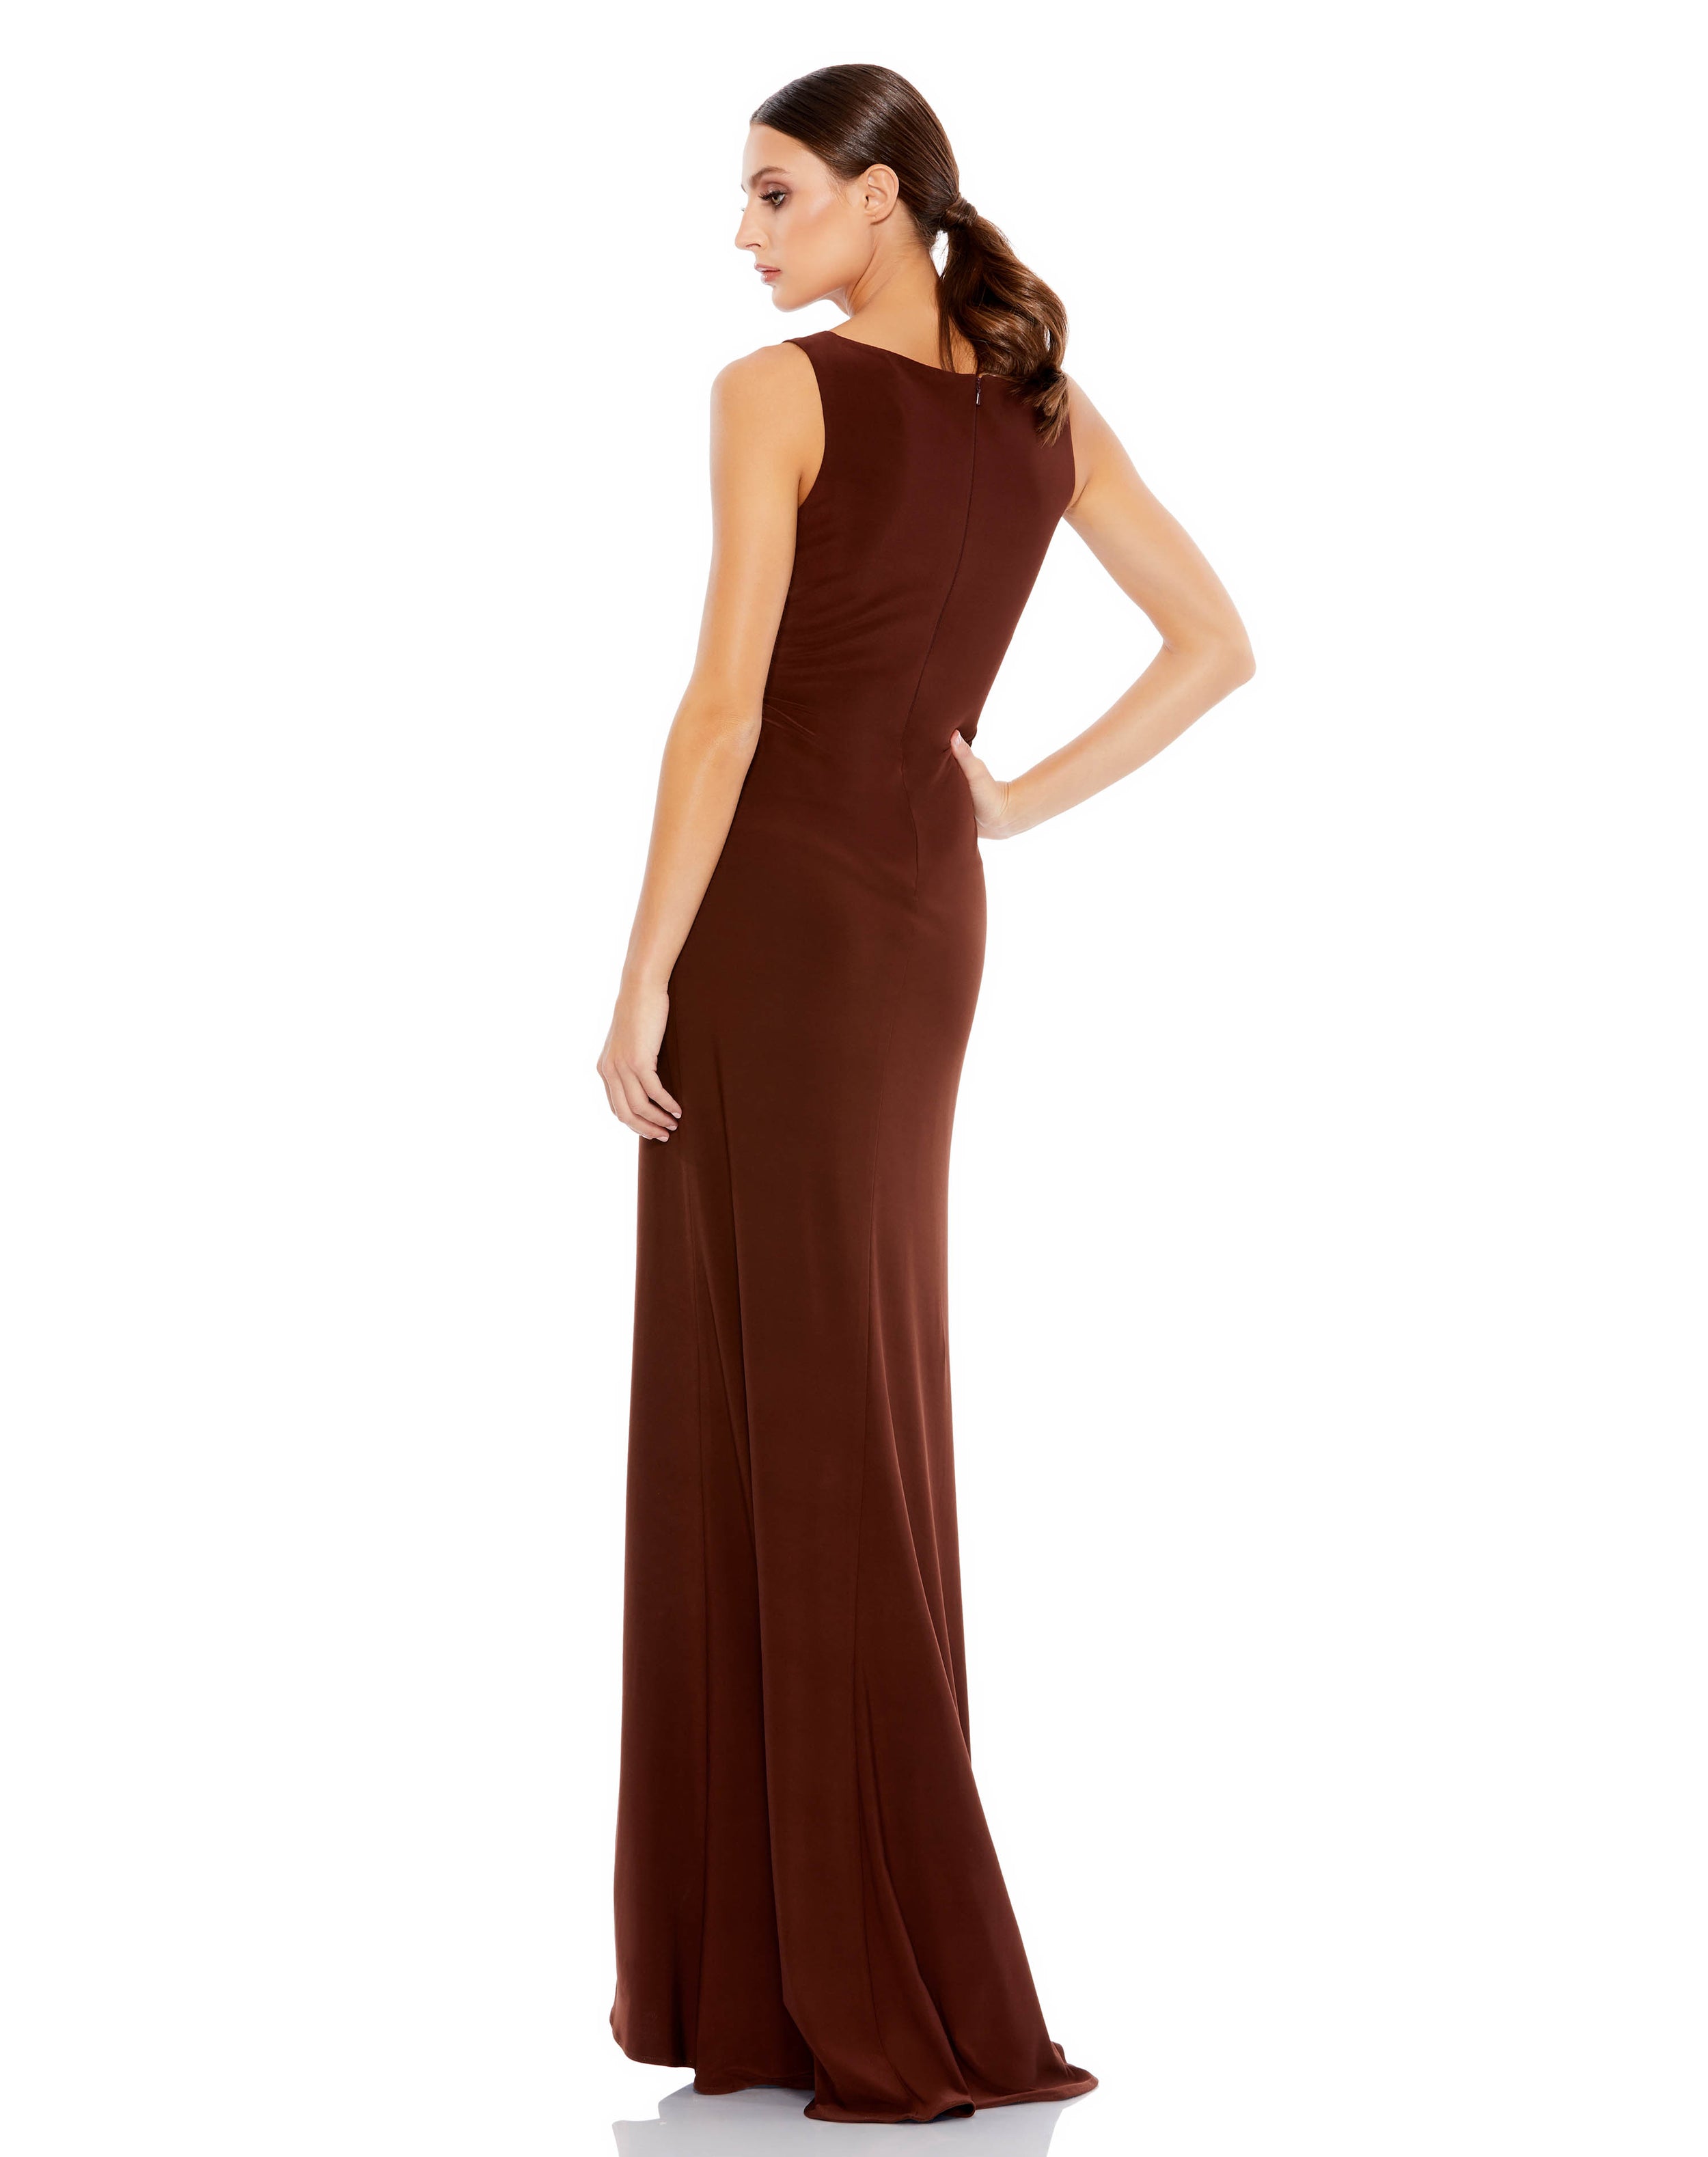 The back view of a woman wearing a Mac Duggal 26513 Prom Long Sleeveless Formal Dress.